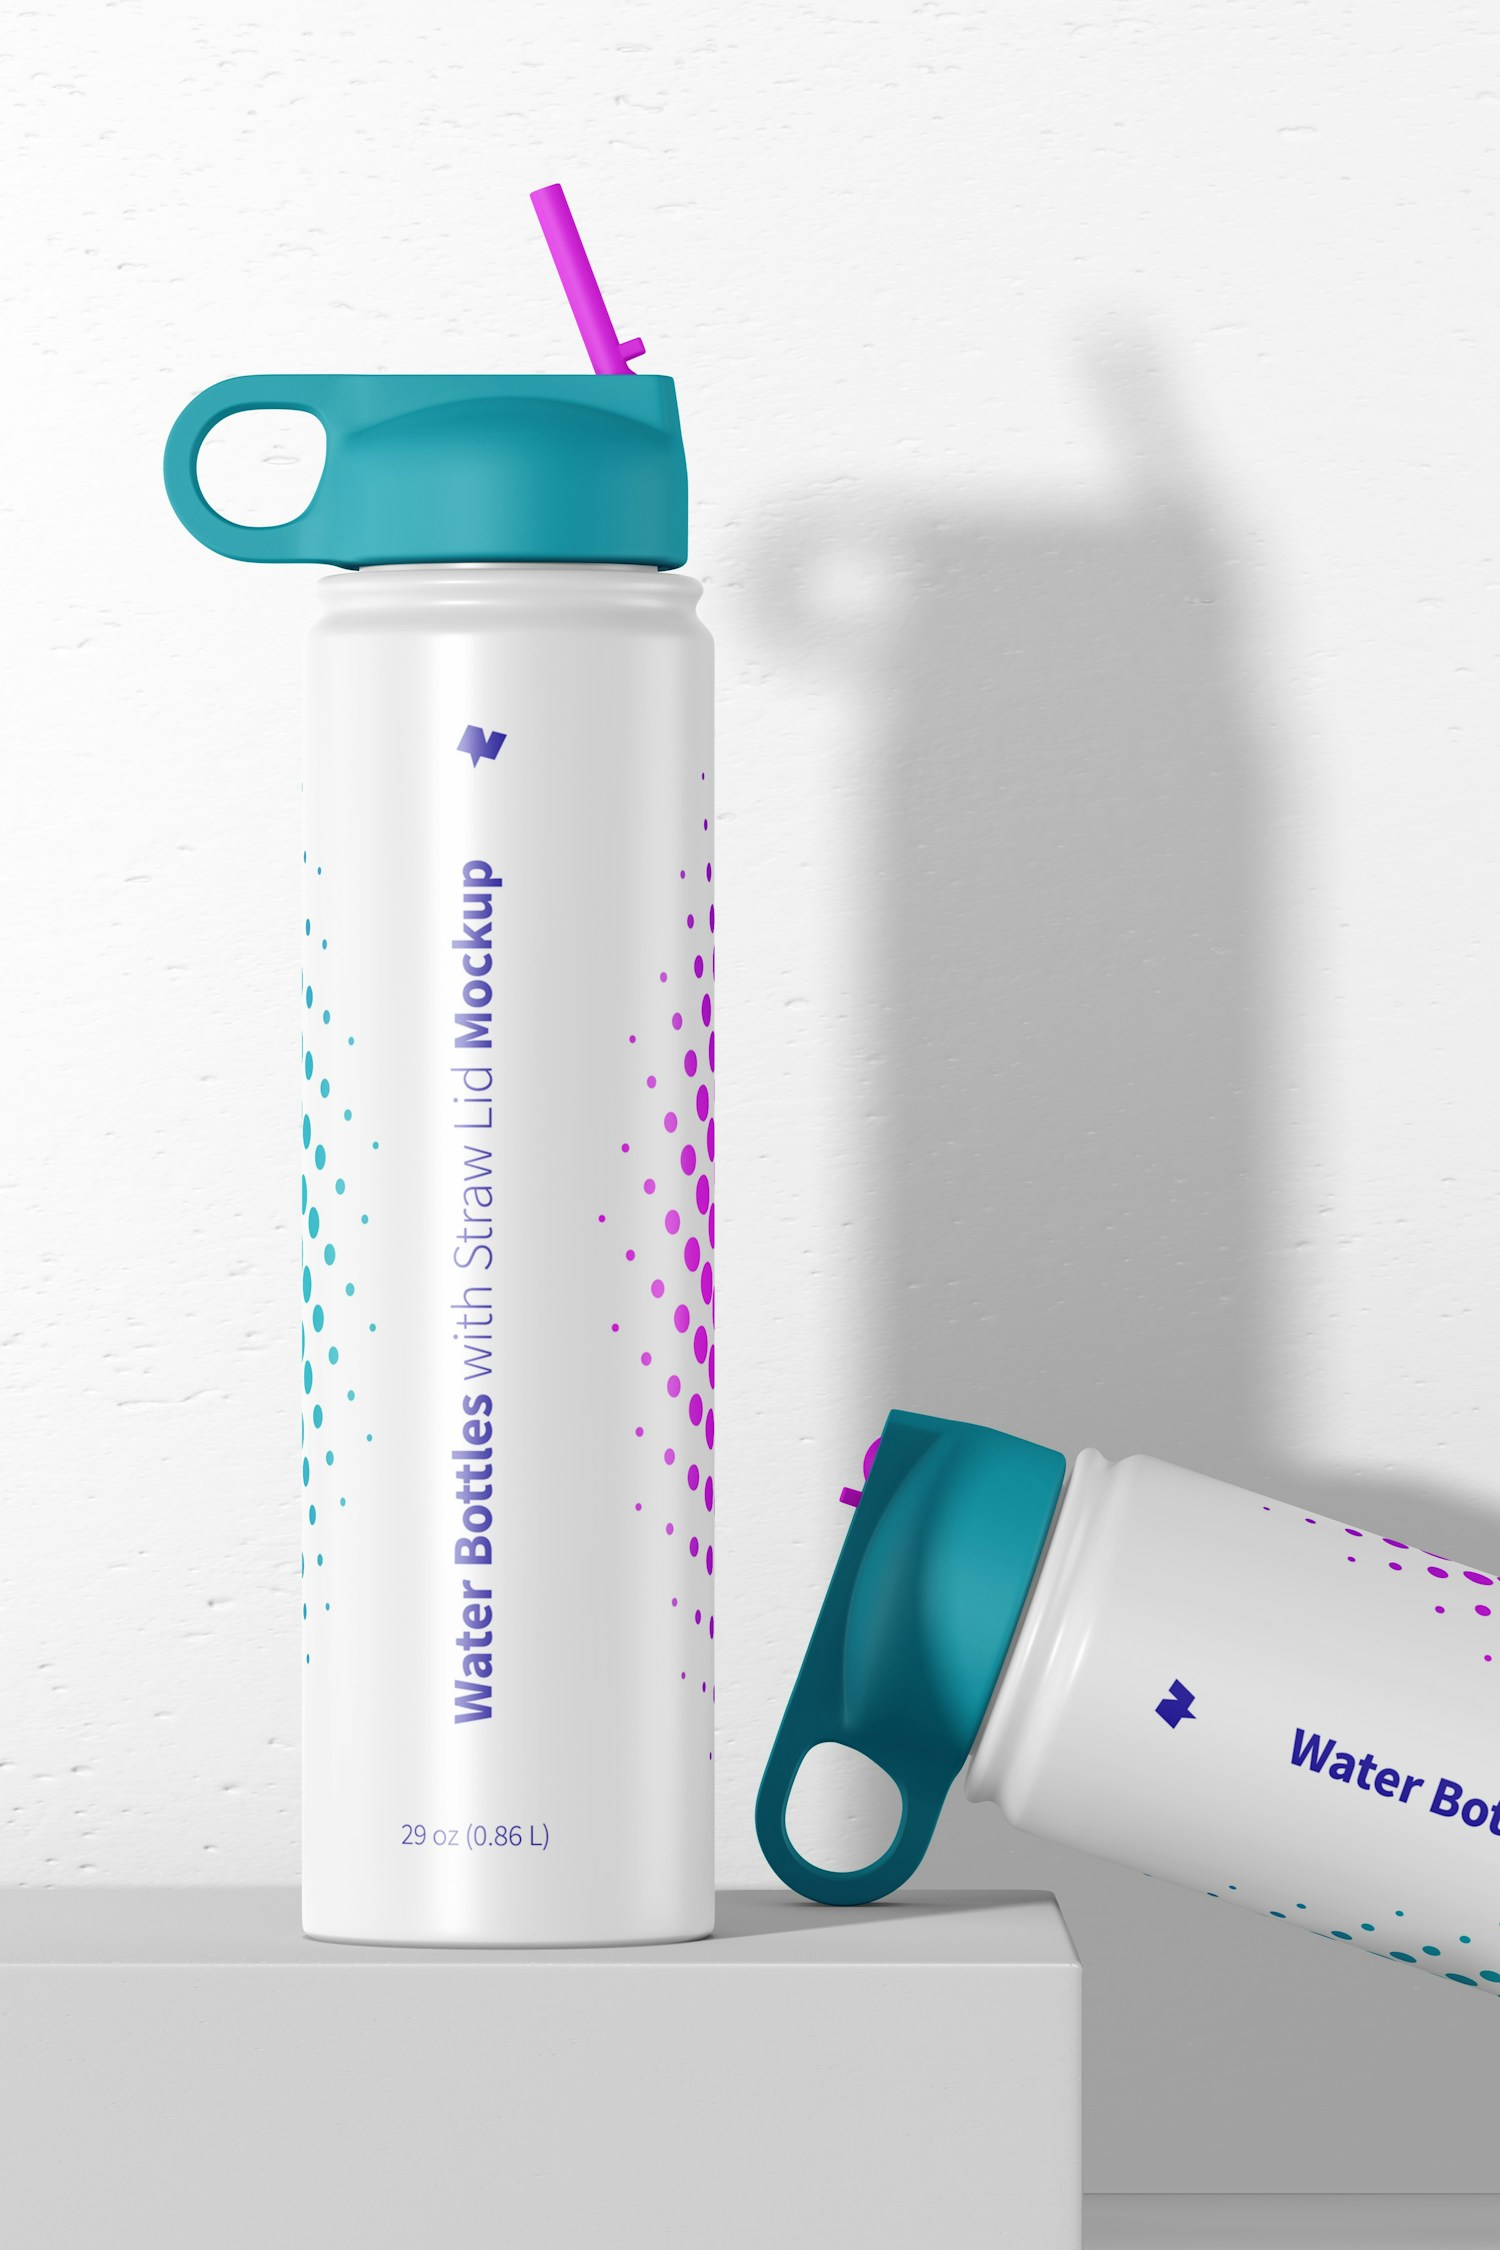 Water Bottles with Straw Lid Mockup